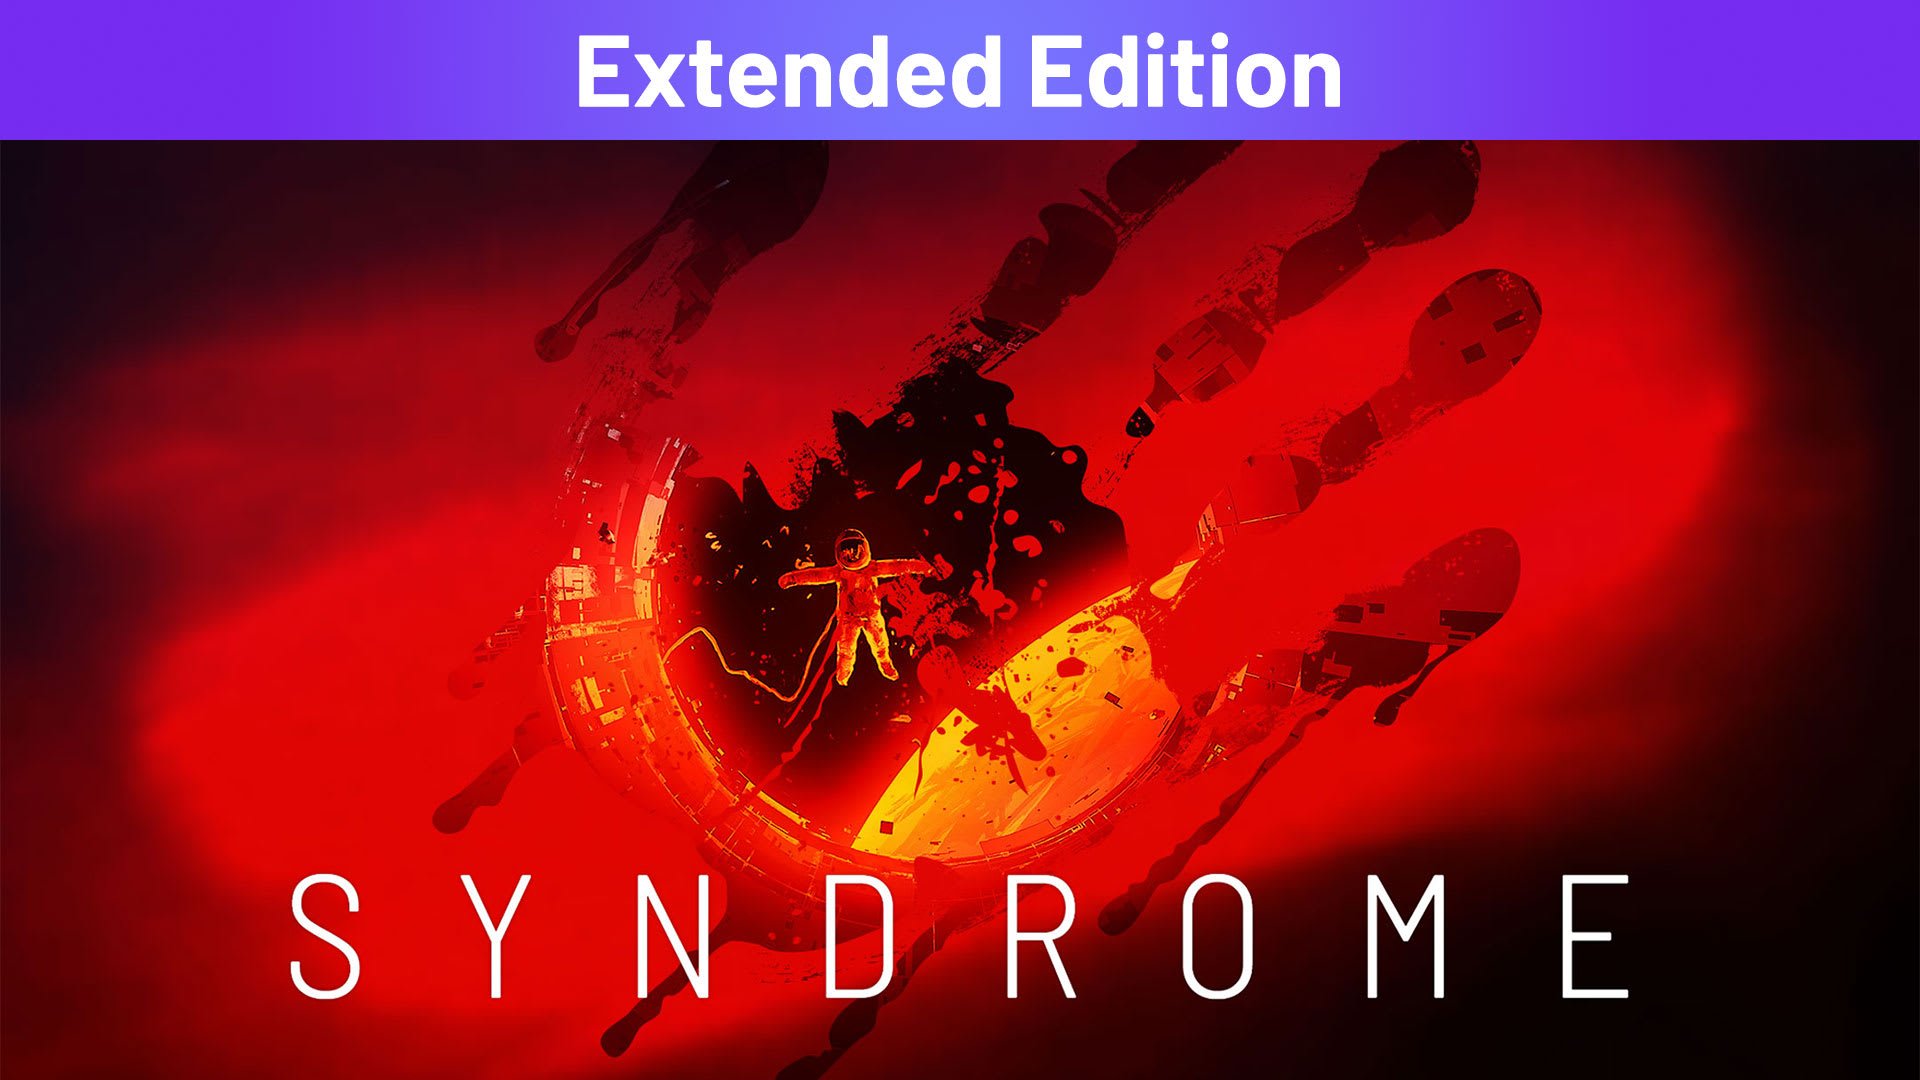 Syndrome Extended Edition